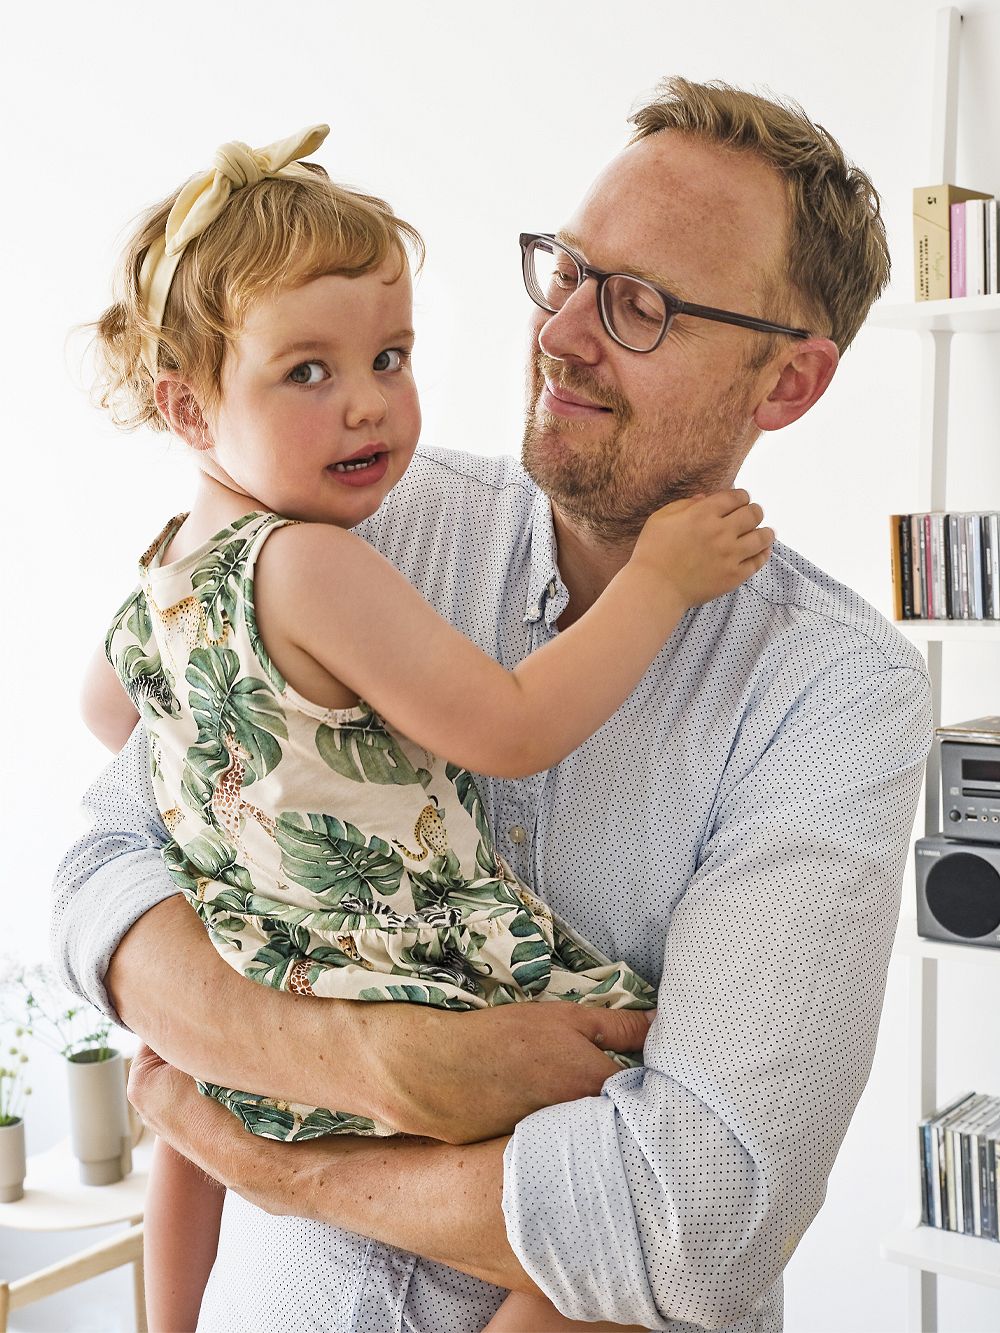 Lasse Lund Lauridsen with his daughter Freja